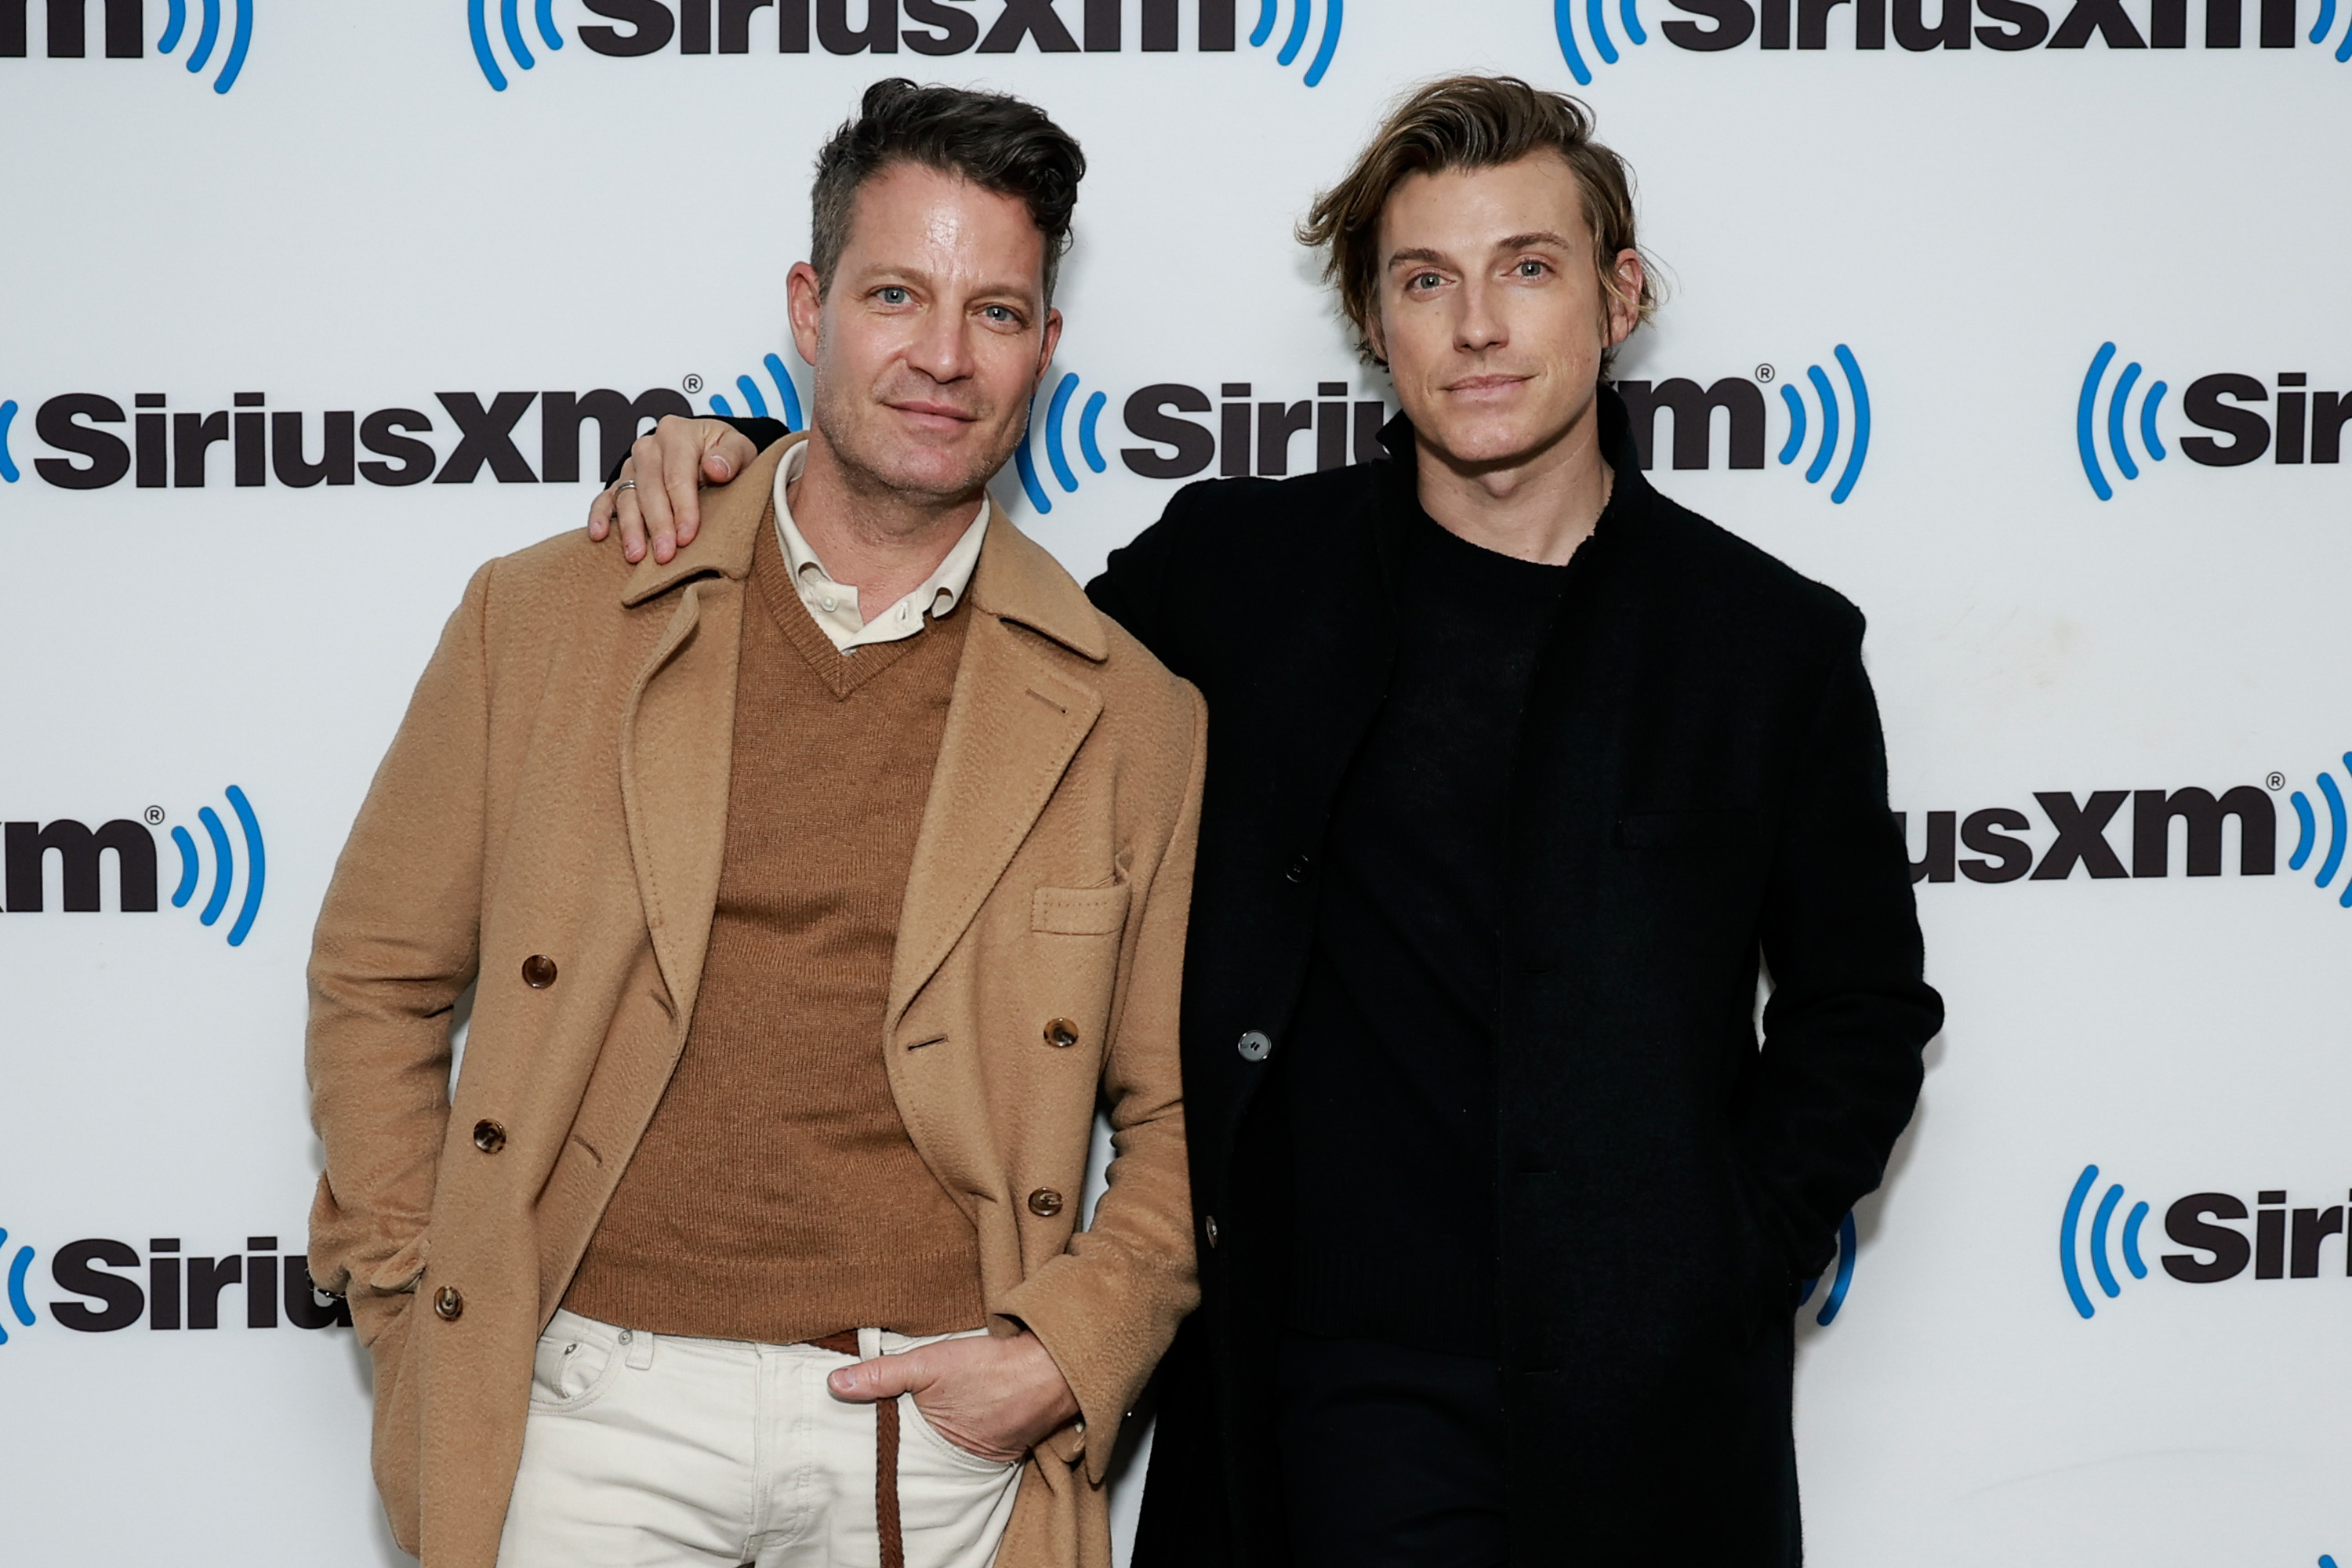 Two men posing at a SiriusXM event, one in a tan coat and white shirt, the other in a black outfit